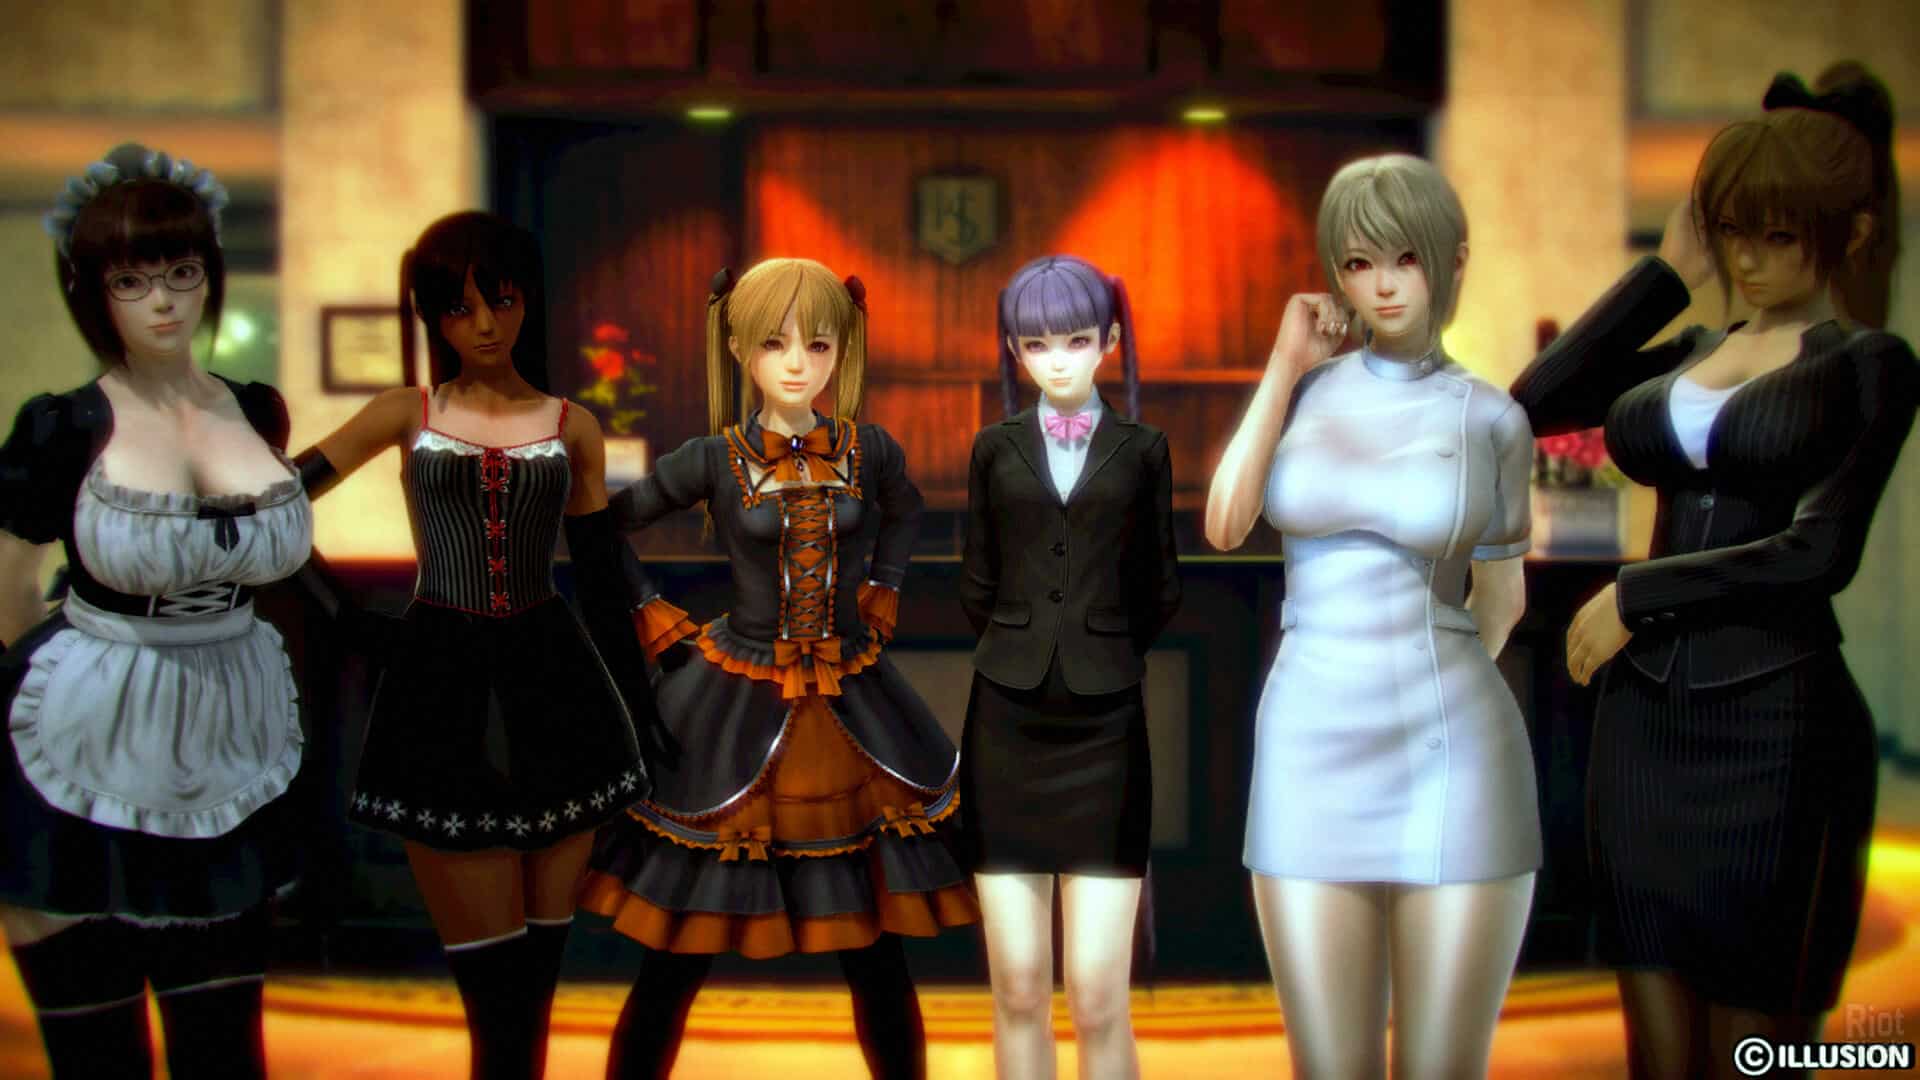 honey select appearing on steam